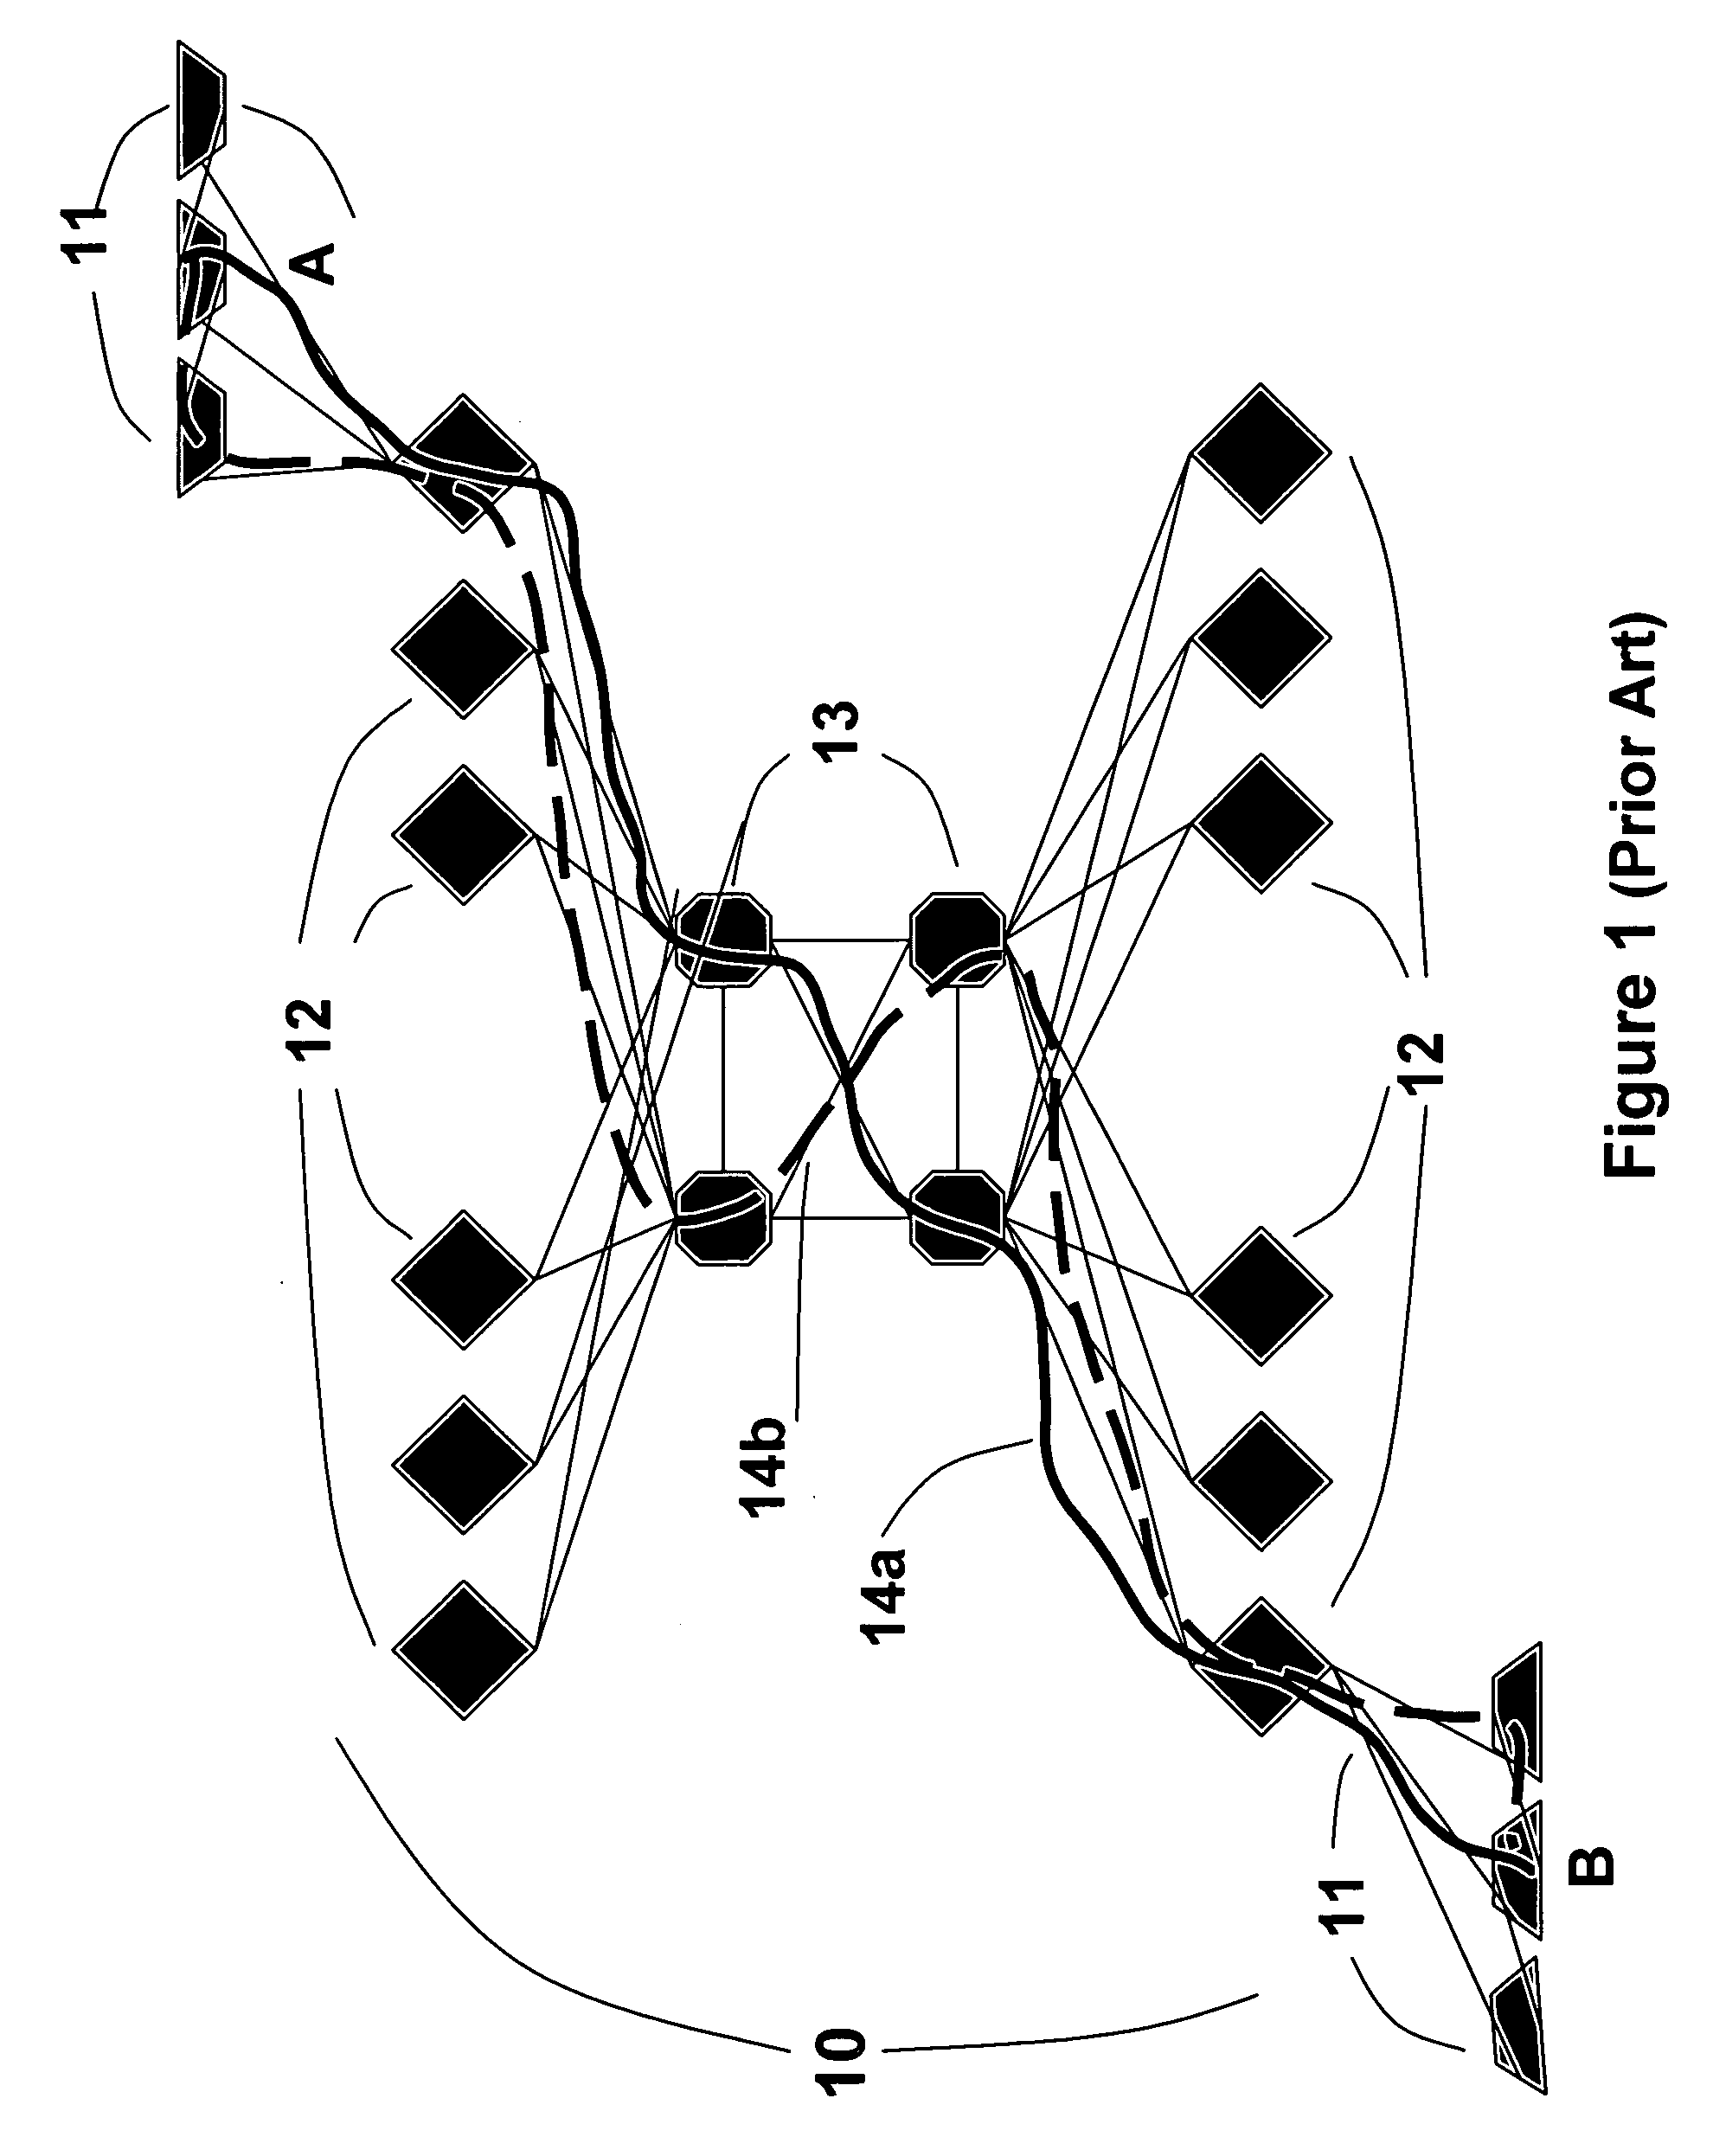 System and method for monitoring a data network segment